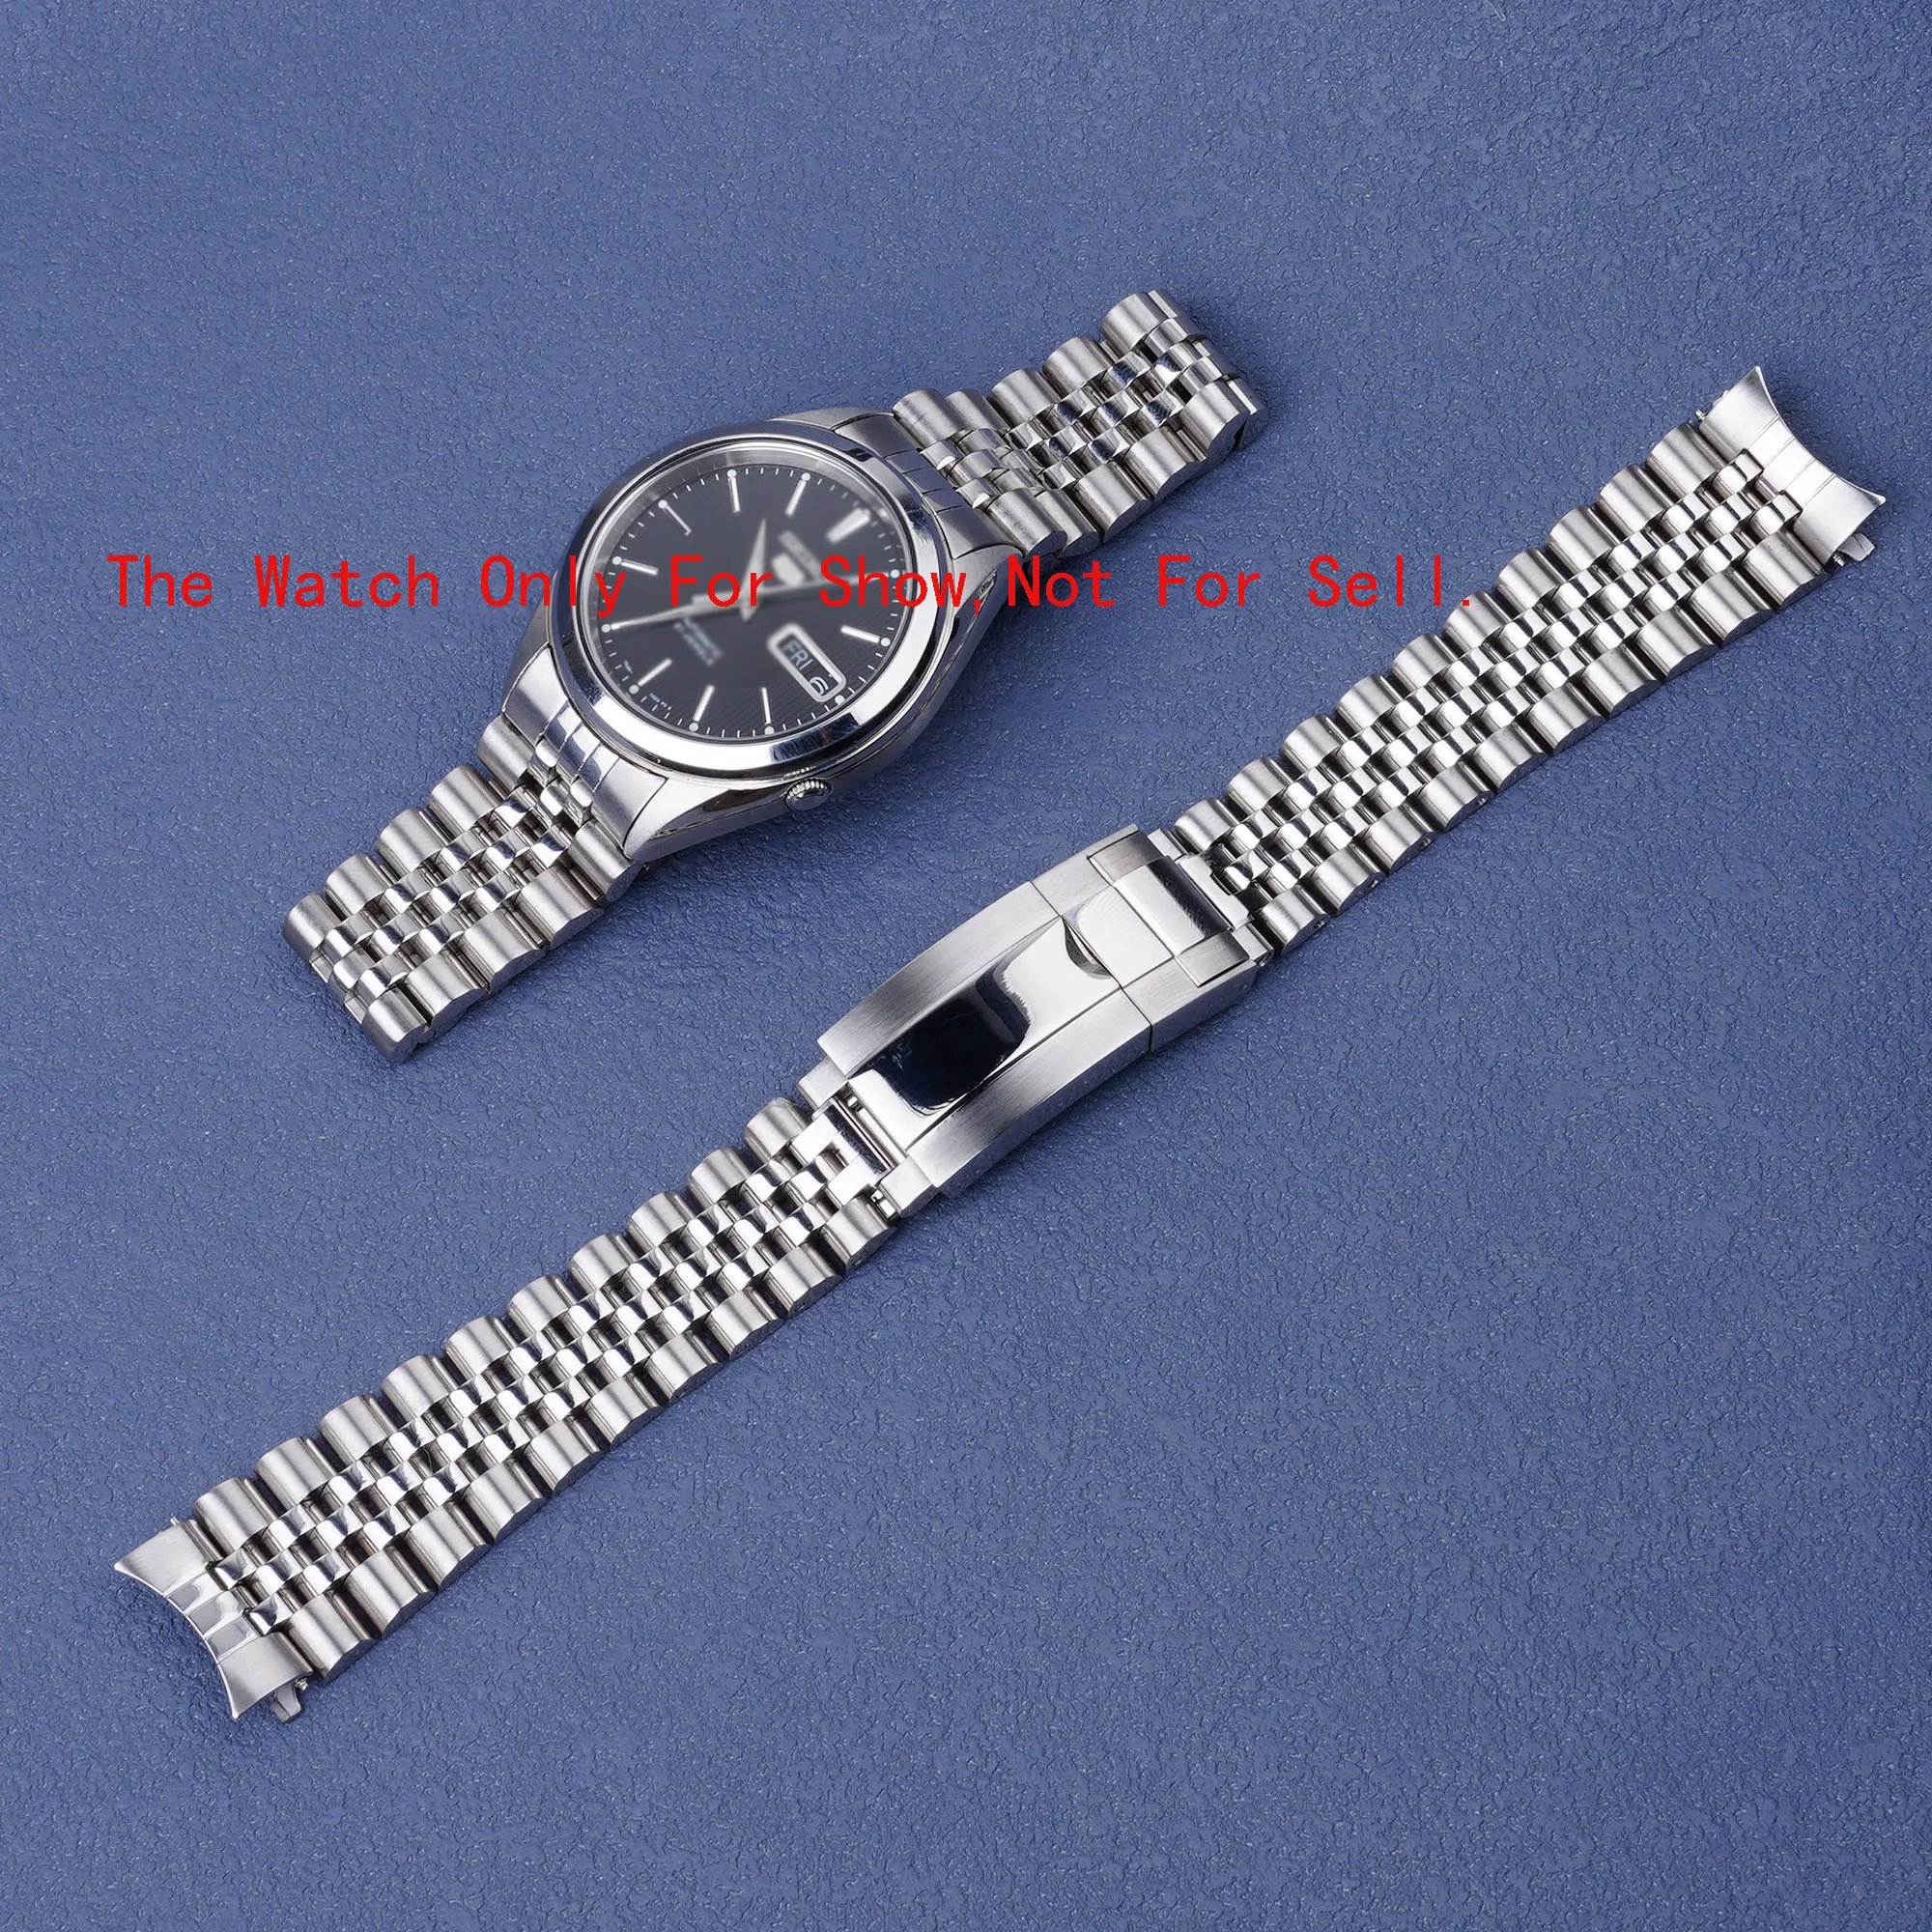 

Rolamy New 18mm Jubilee Hollow Endband with Oyster Deployment Clasp Stainless Steel Watch Band For Seiko 5 SNKL23